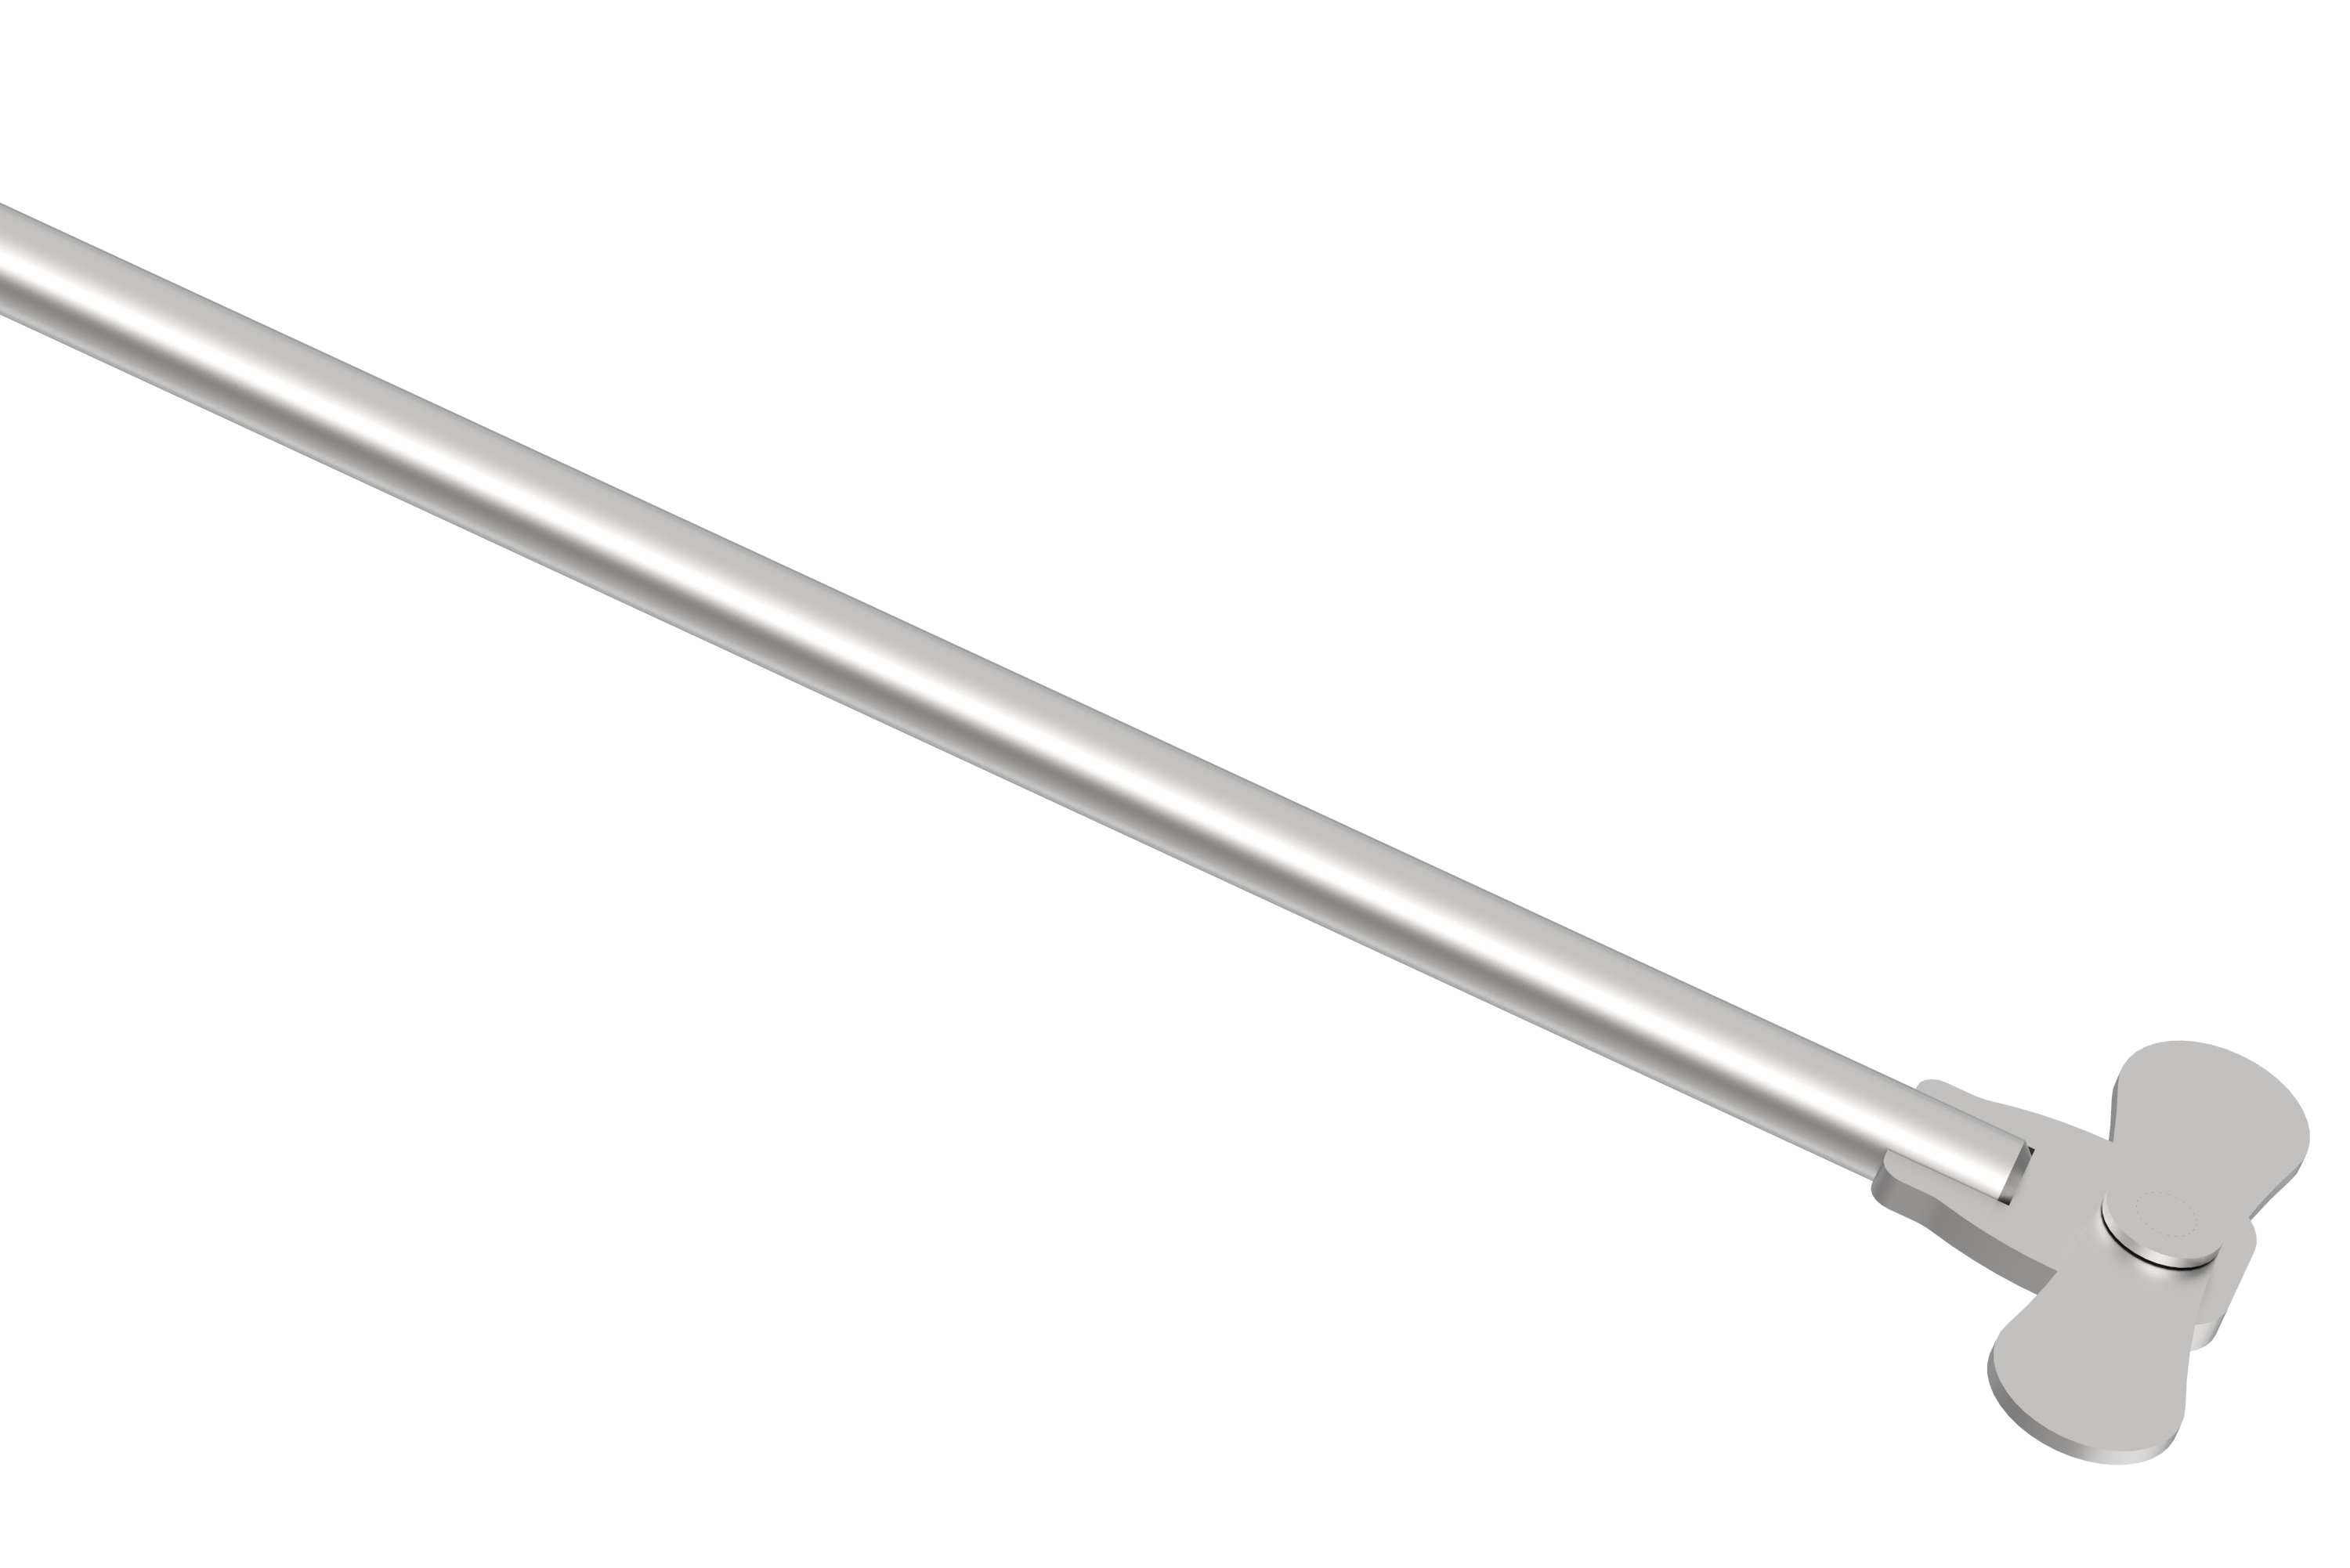 Laboratory paddle stirrer made out of stainless steel